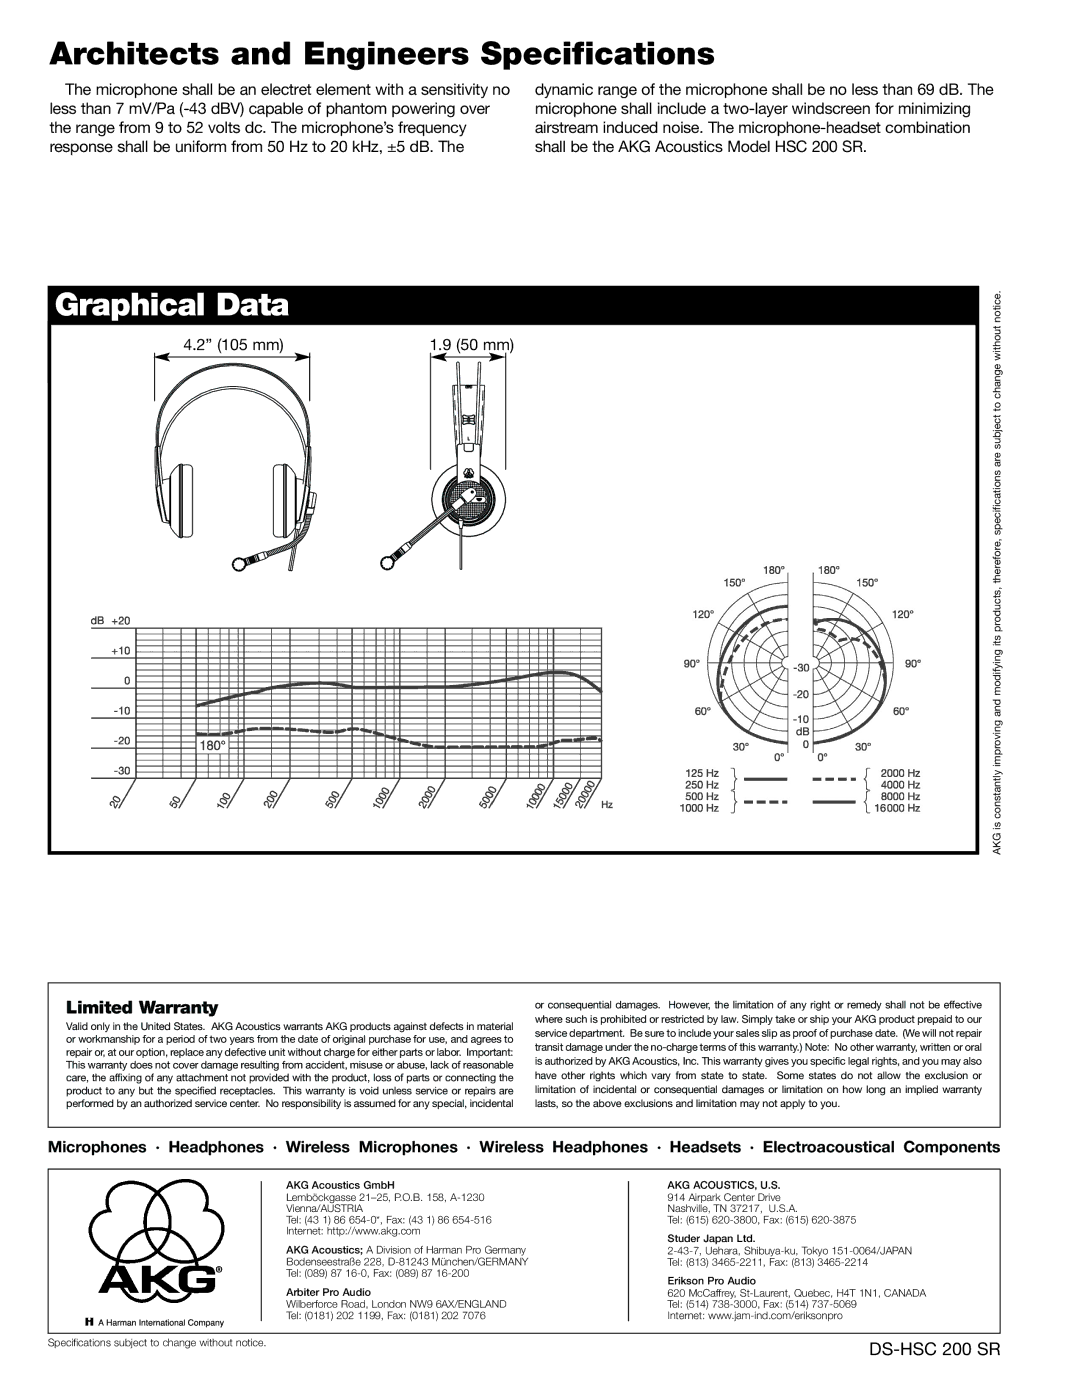 AKG Acoustics HSC 200 SR specifications Architects and Engineers Specifications, Graphical Data 